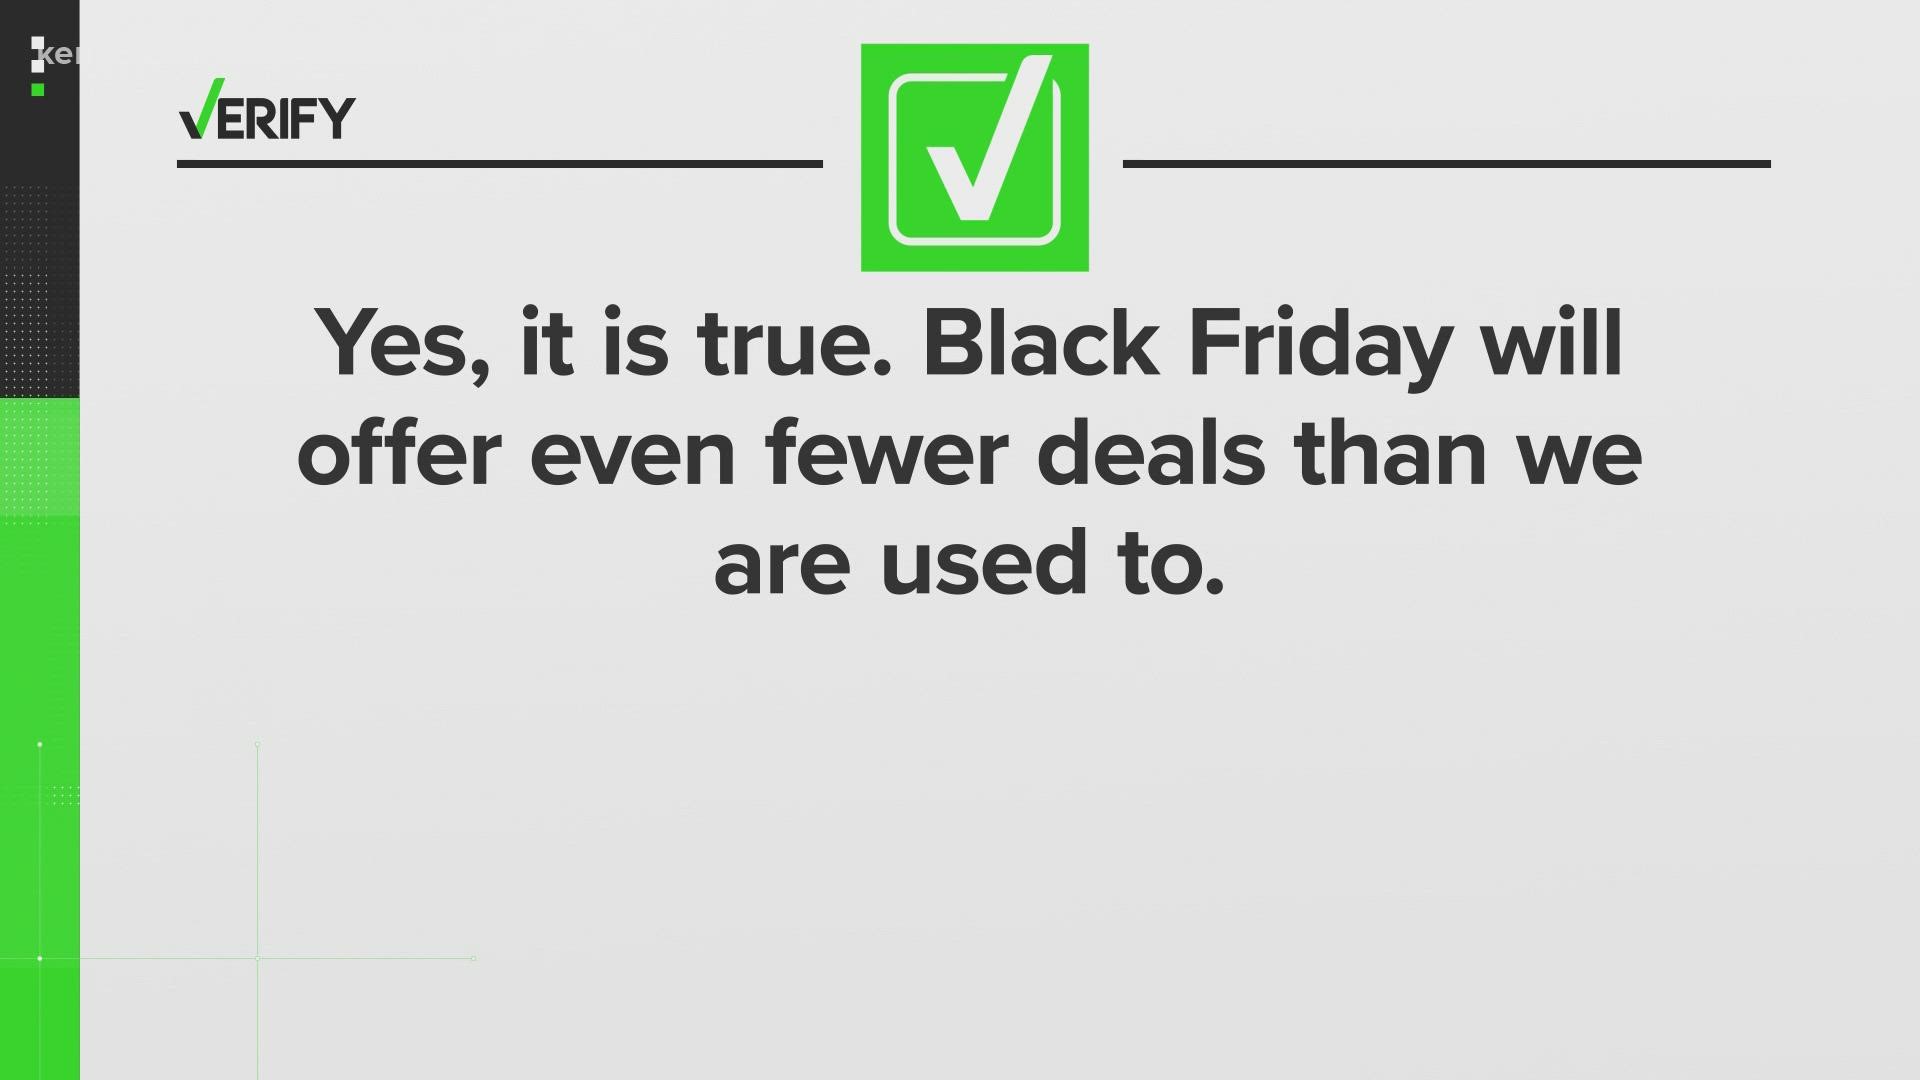 Many retailers started Black Friday sales earlier this week, leading to fewer deals on Friday.